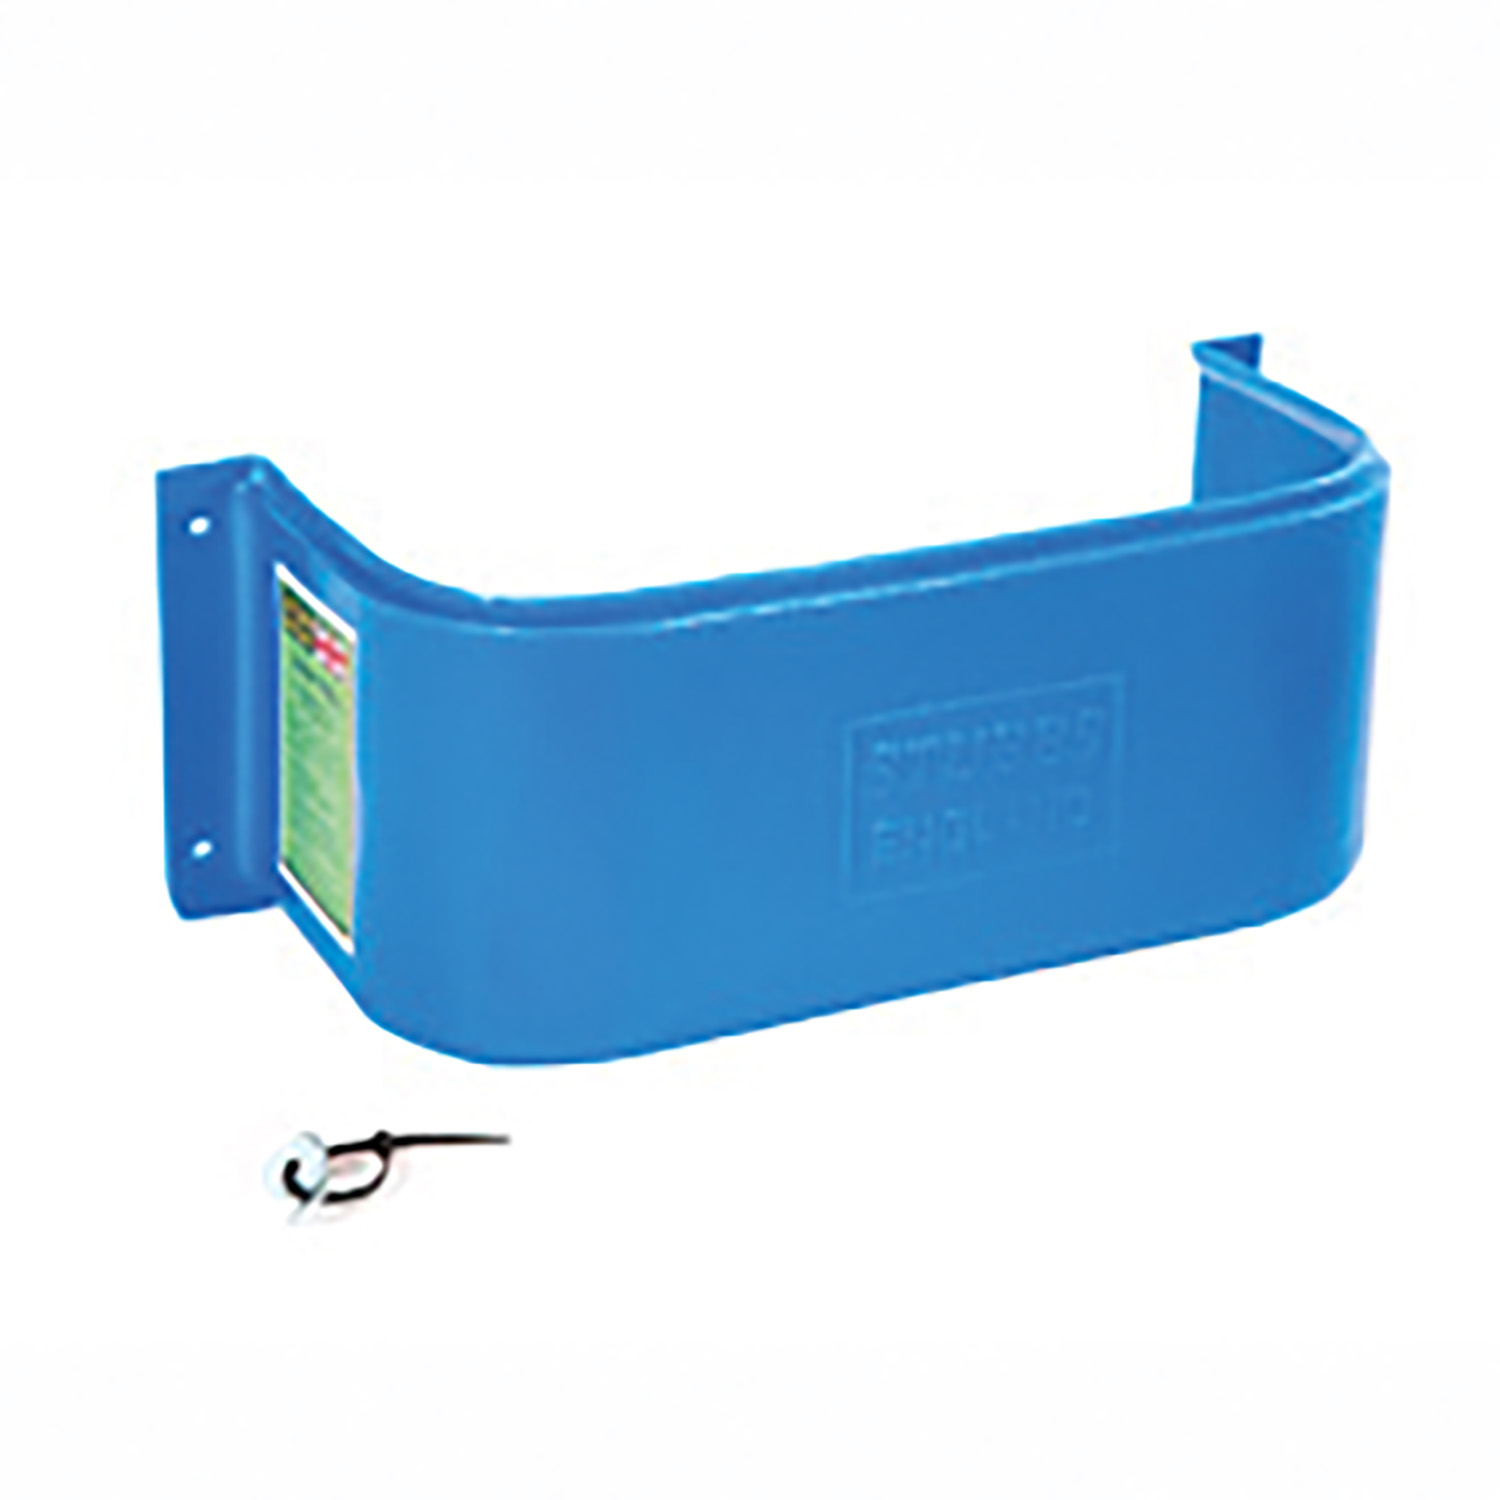 STUBBS STABLE TIDY S861 BLUE